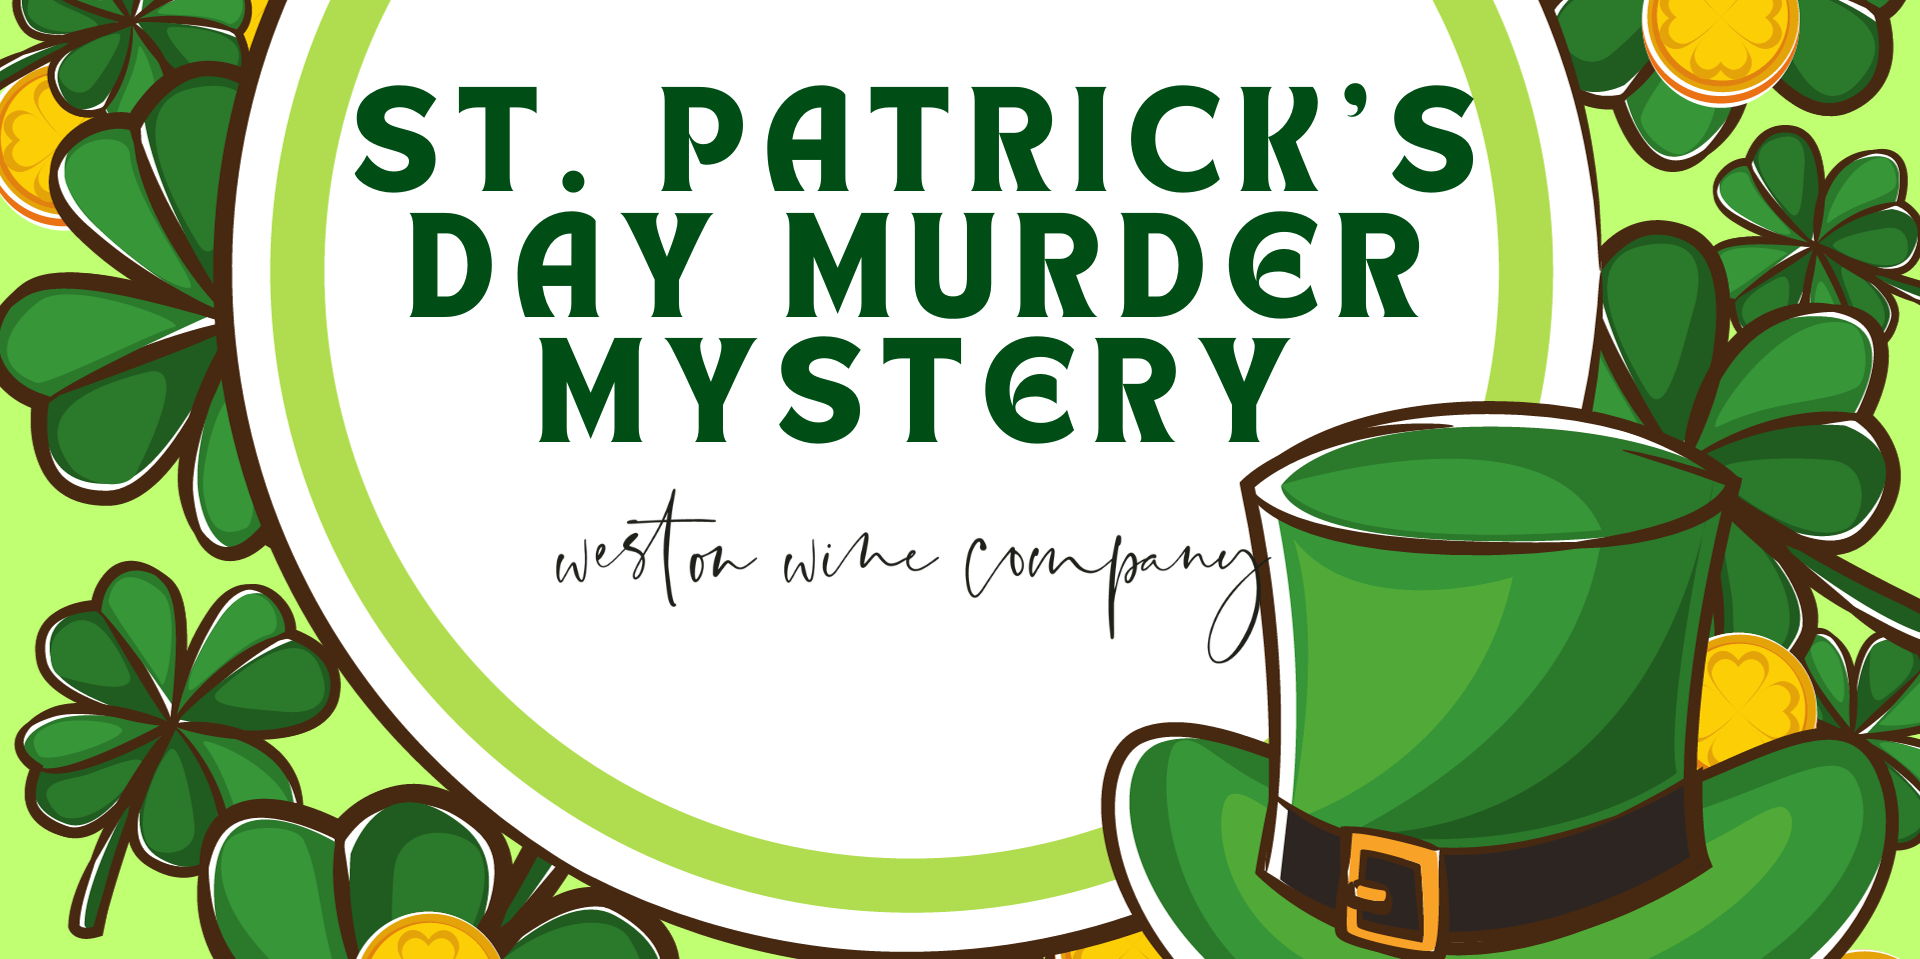 St. Patrick's Day Murder Mystery promotional image